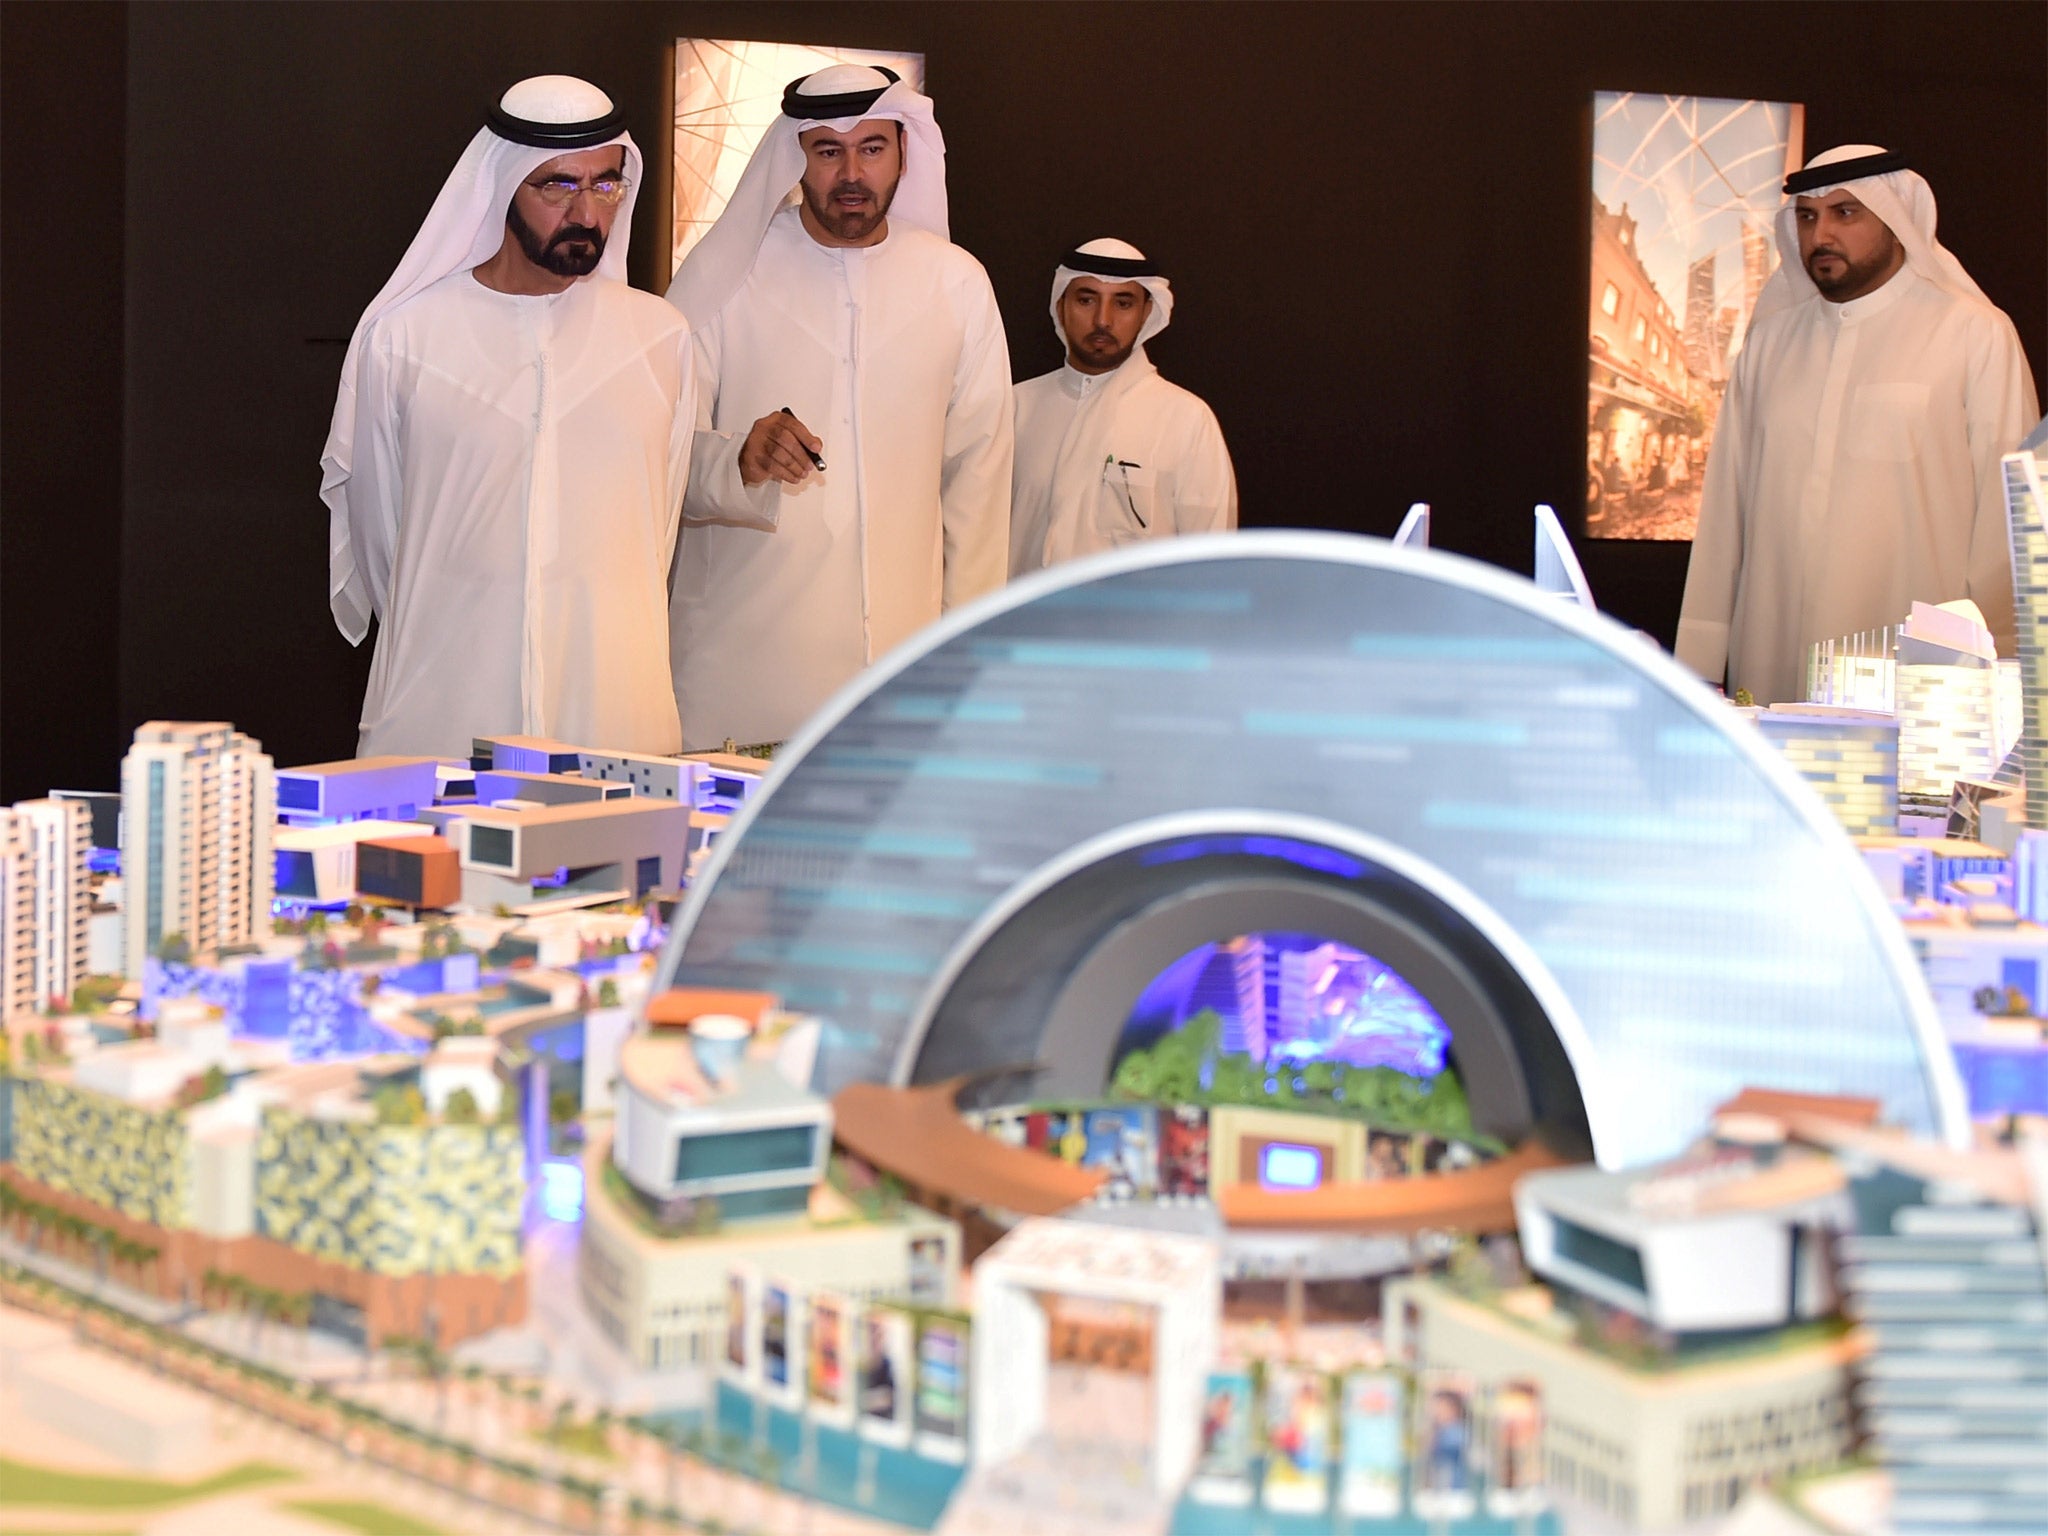 Sheikh Mohammed Bin Rashid al-Maktoum (left), ruler of Dubai, looking at a model of the 'Mall of the World' project during its presentation in Dubai